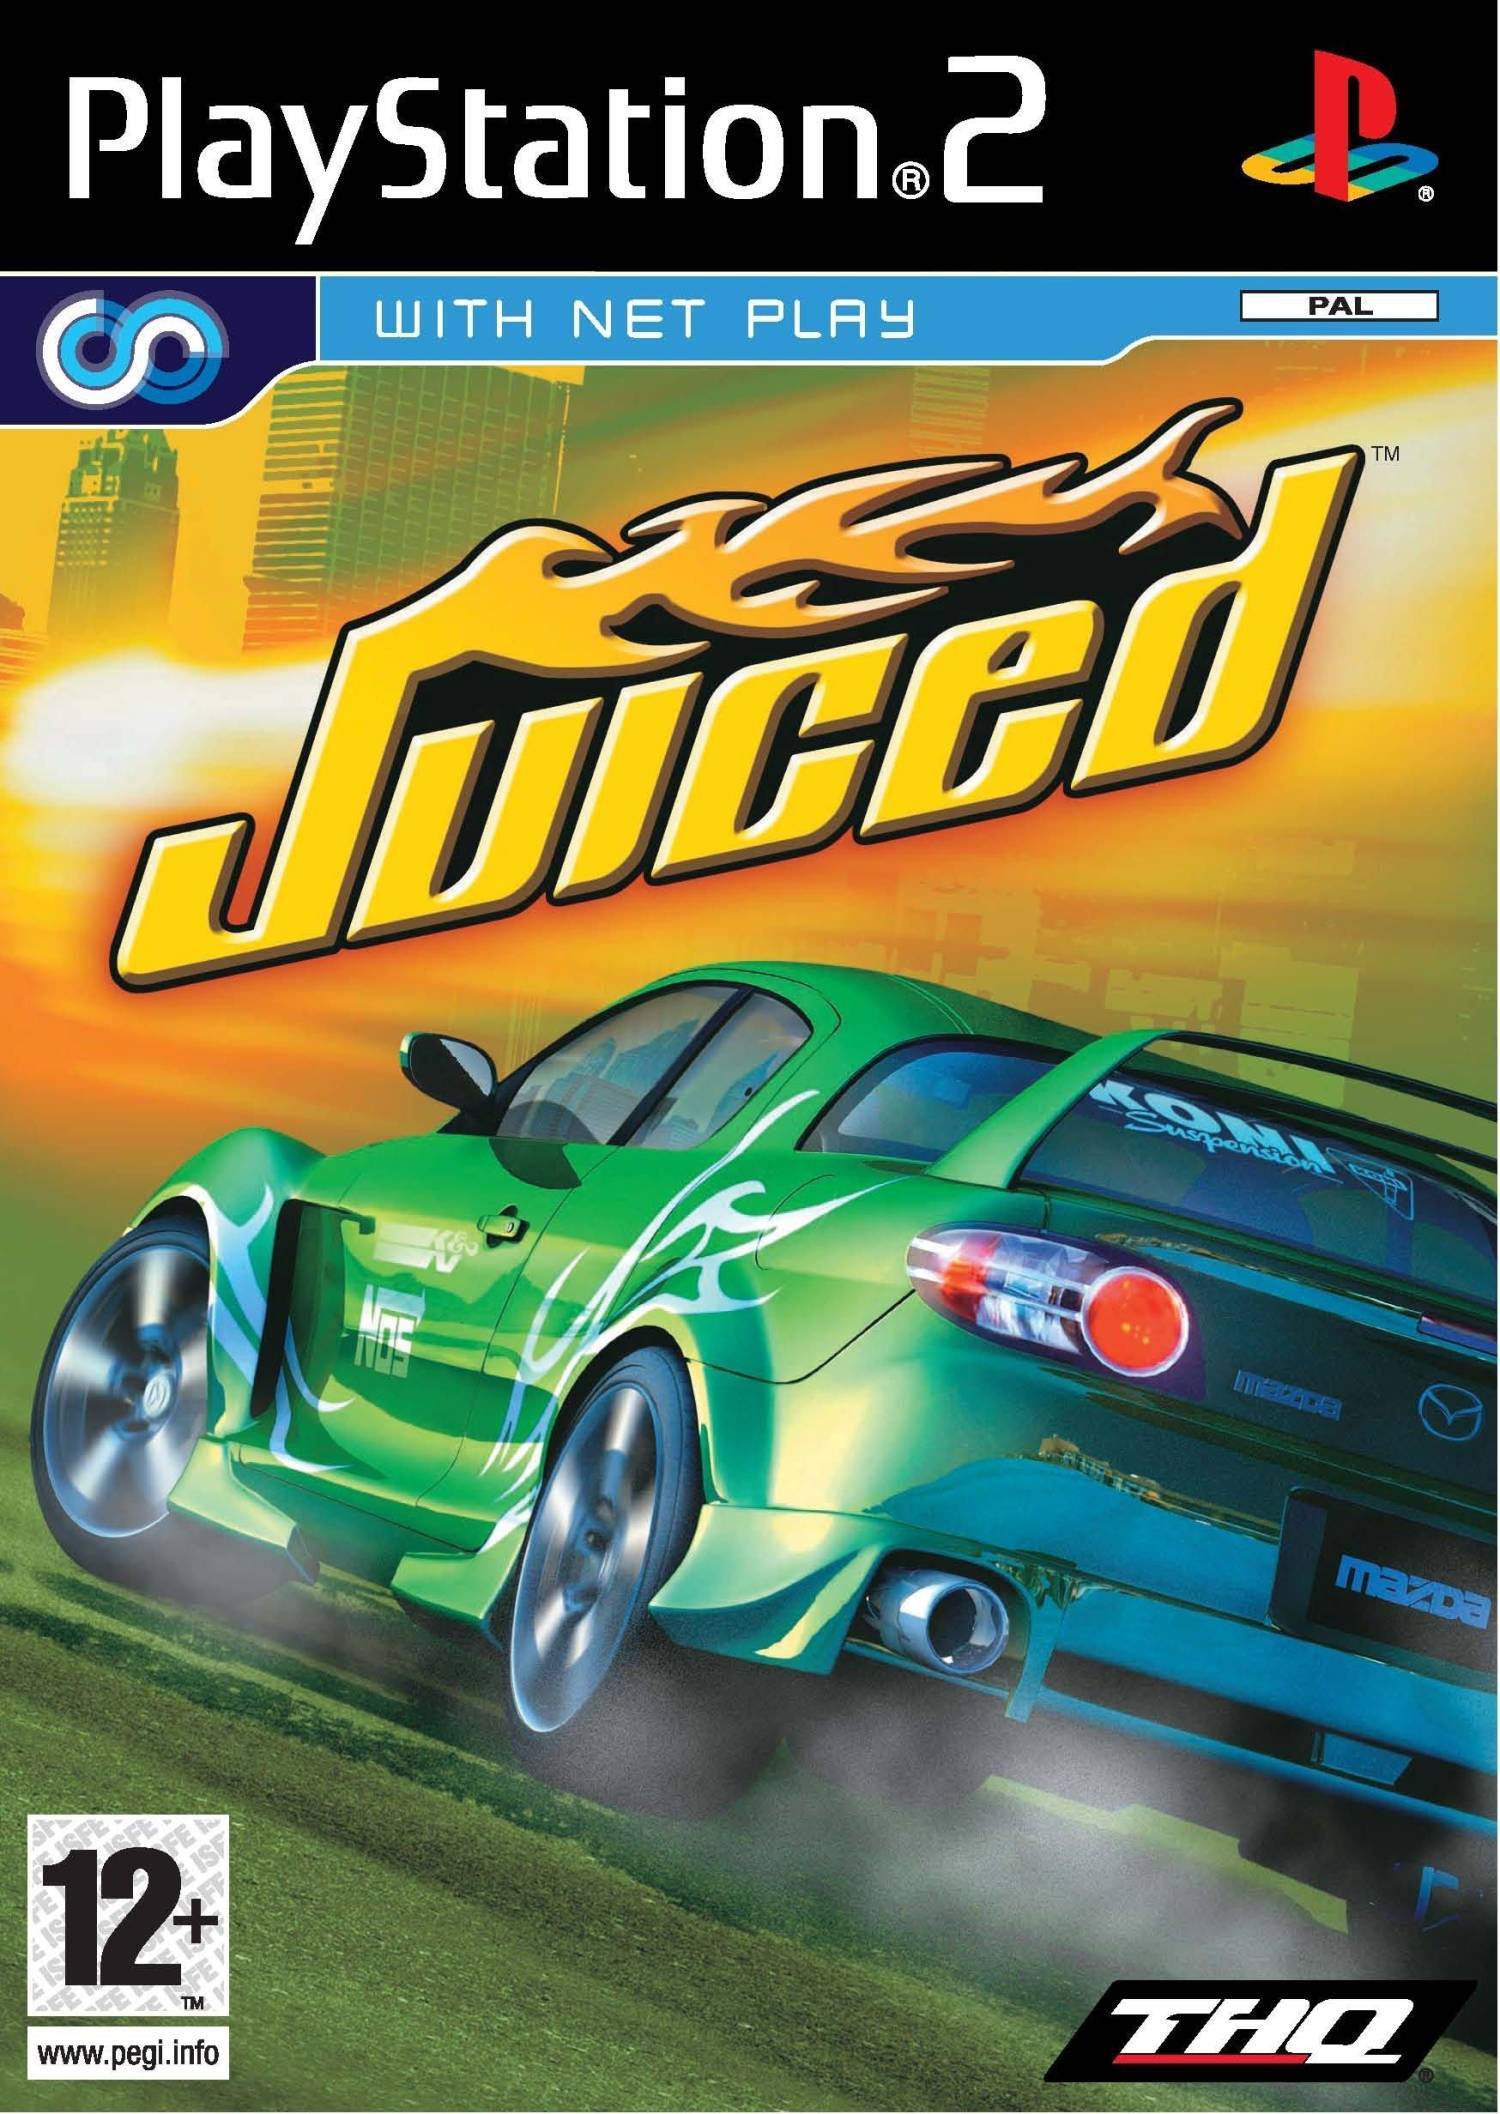 Game | Sony Playstation PS2 | Juiced